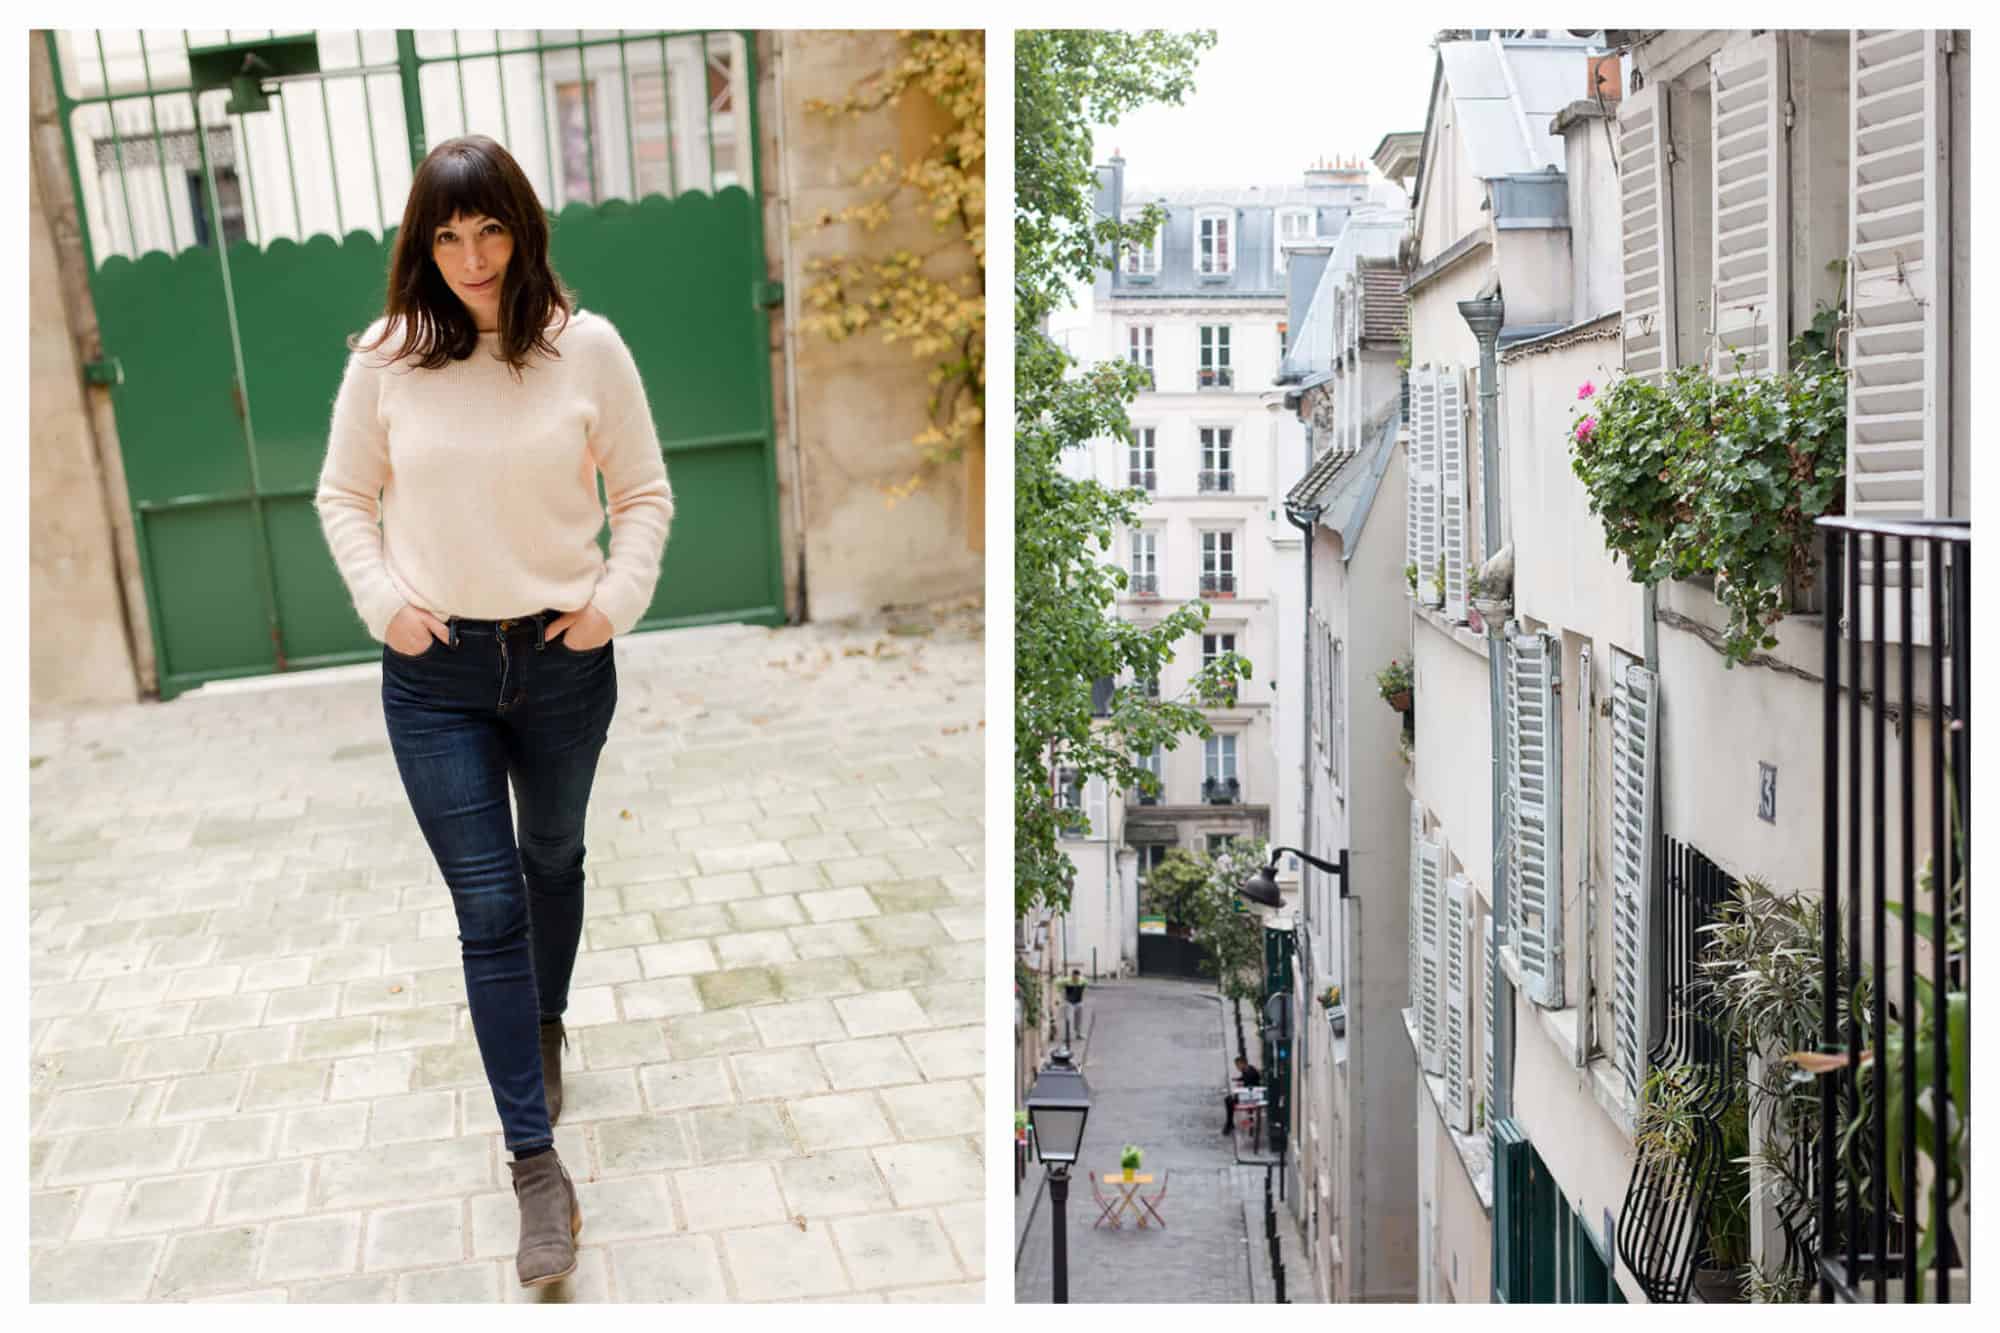 On left: Rebecca Plotnick, travel photographer and blogger at Everyday Parisian, on a stroll through Paris. On right: The charming shuttered facades of Montmartre stay open on a warm day. 